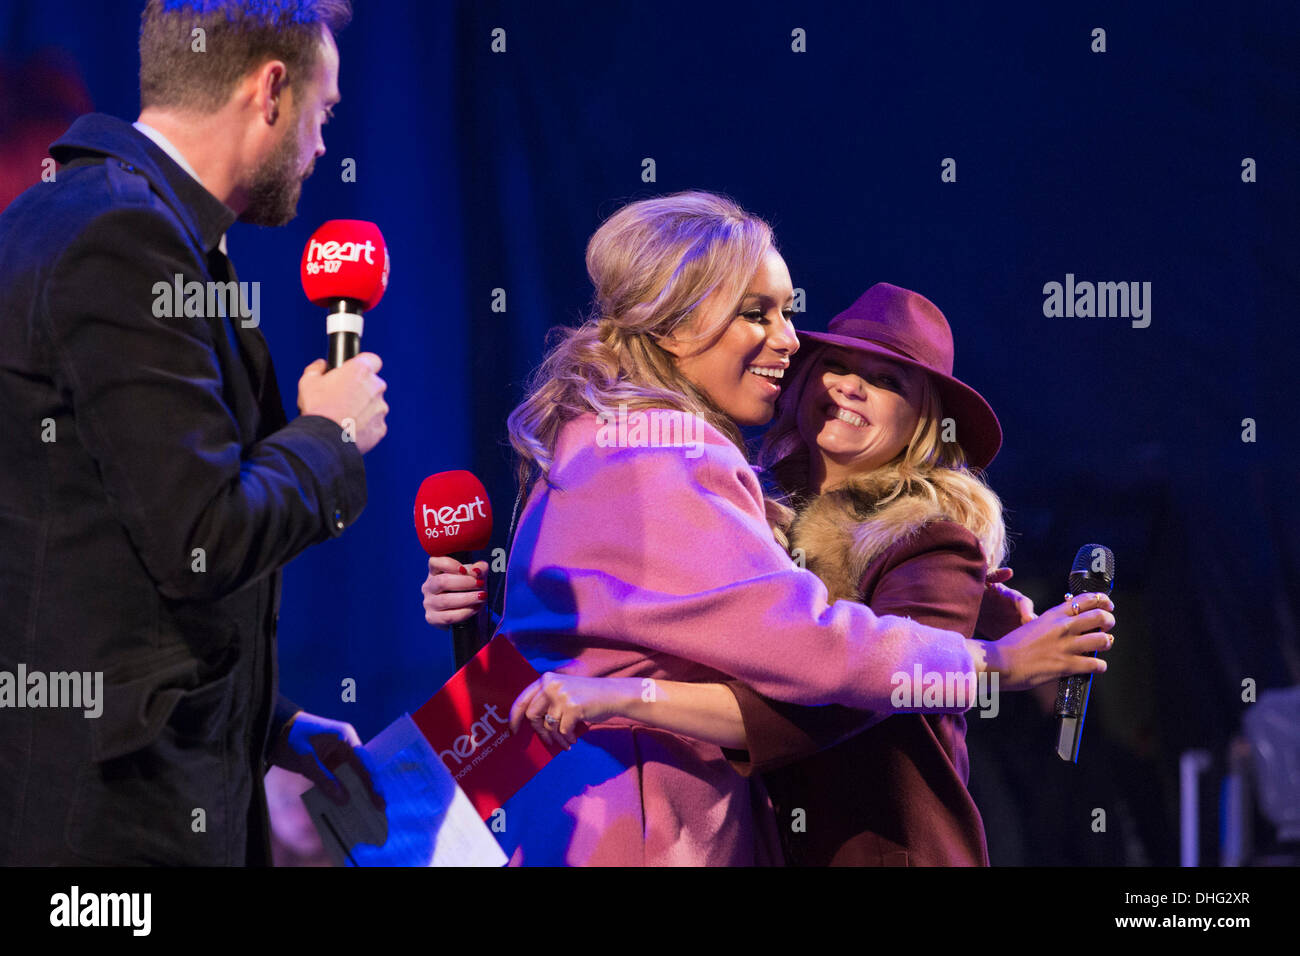 London, UK. 9 November 2013. X-Factor winner Leona Lewis on stage during the concert before the switch-on with Jamie Theakston, left, and Emma Bunton, right. It took the celebrities three attempts on stage until the Regent Street Christmas Lights were finally switched on due to a technical problem. The thousands who had gathered in Regent Street waited patiently and danced to Christmas songs whilst the problem was fixed. Photo: Nick Savage/Alamy Live News Stock Photo